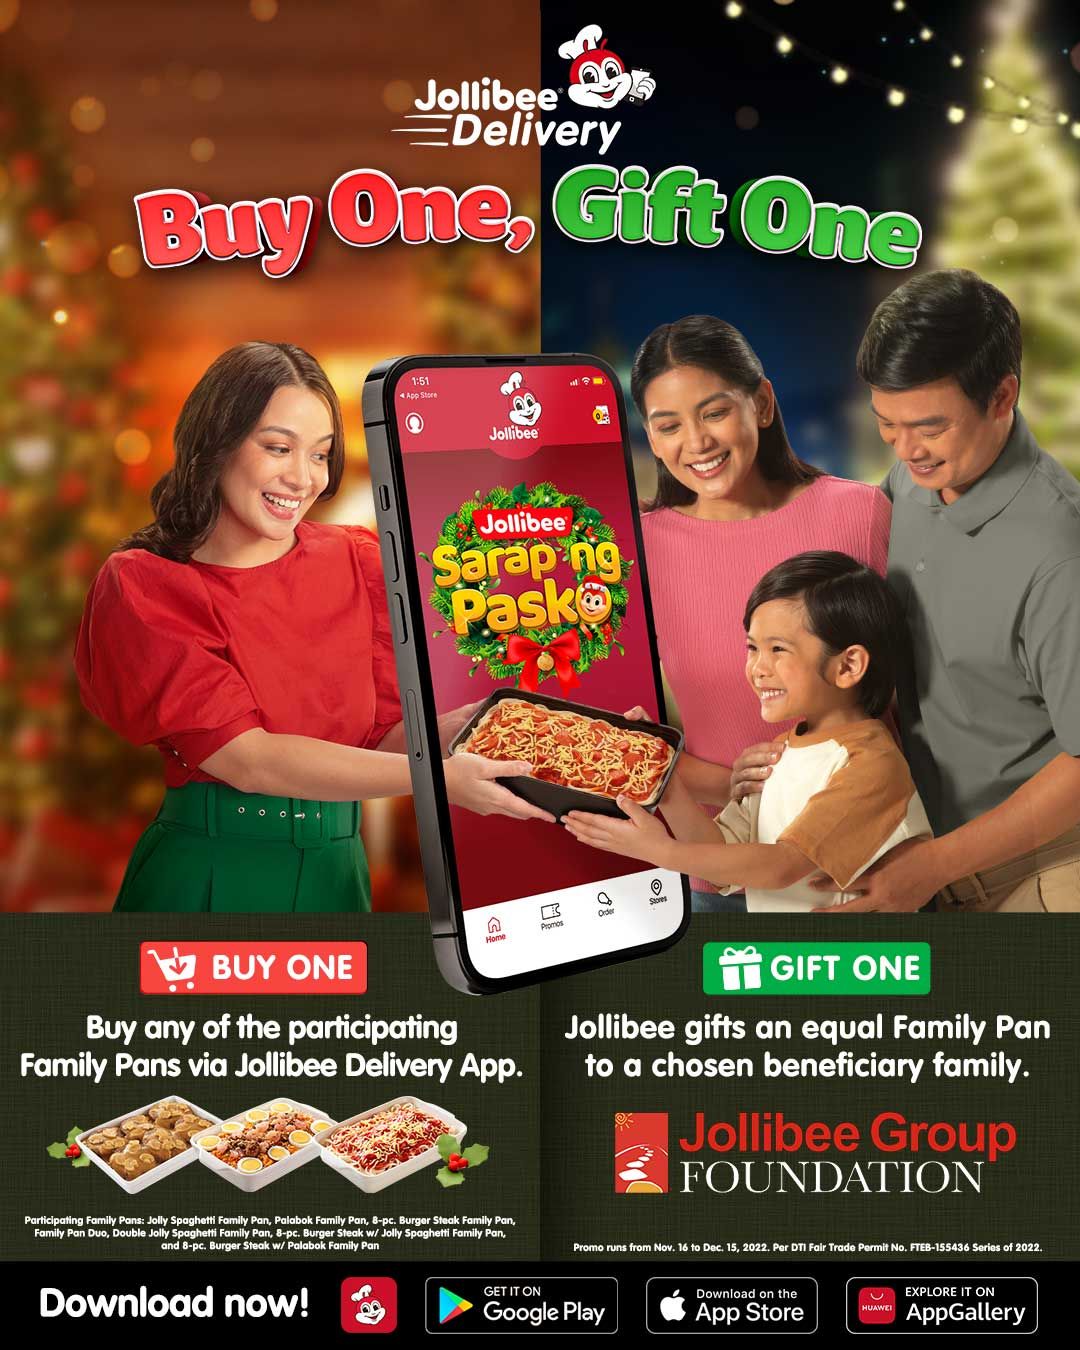 Buy One, Gift One in Jollibee's  "SARAP NG PASKO" Delivery Promo